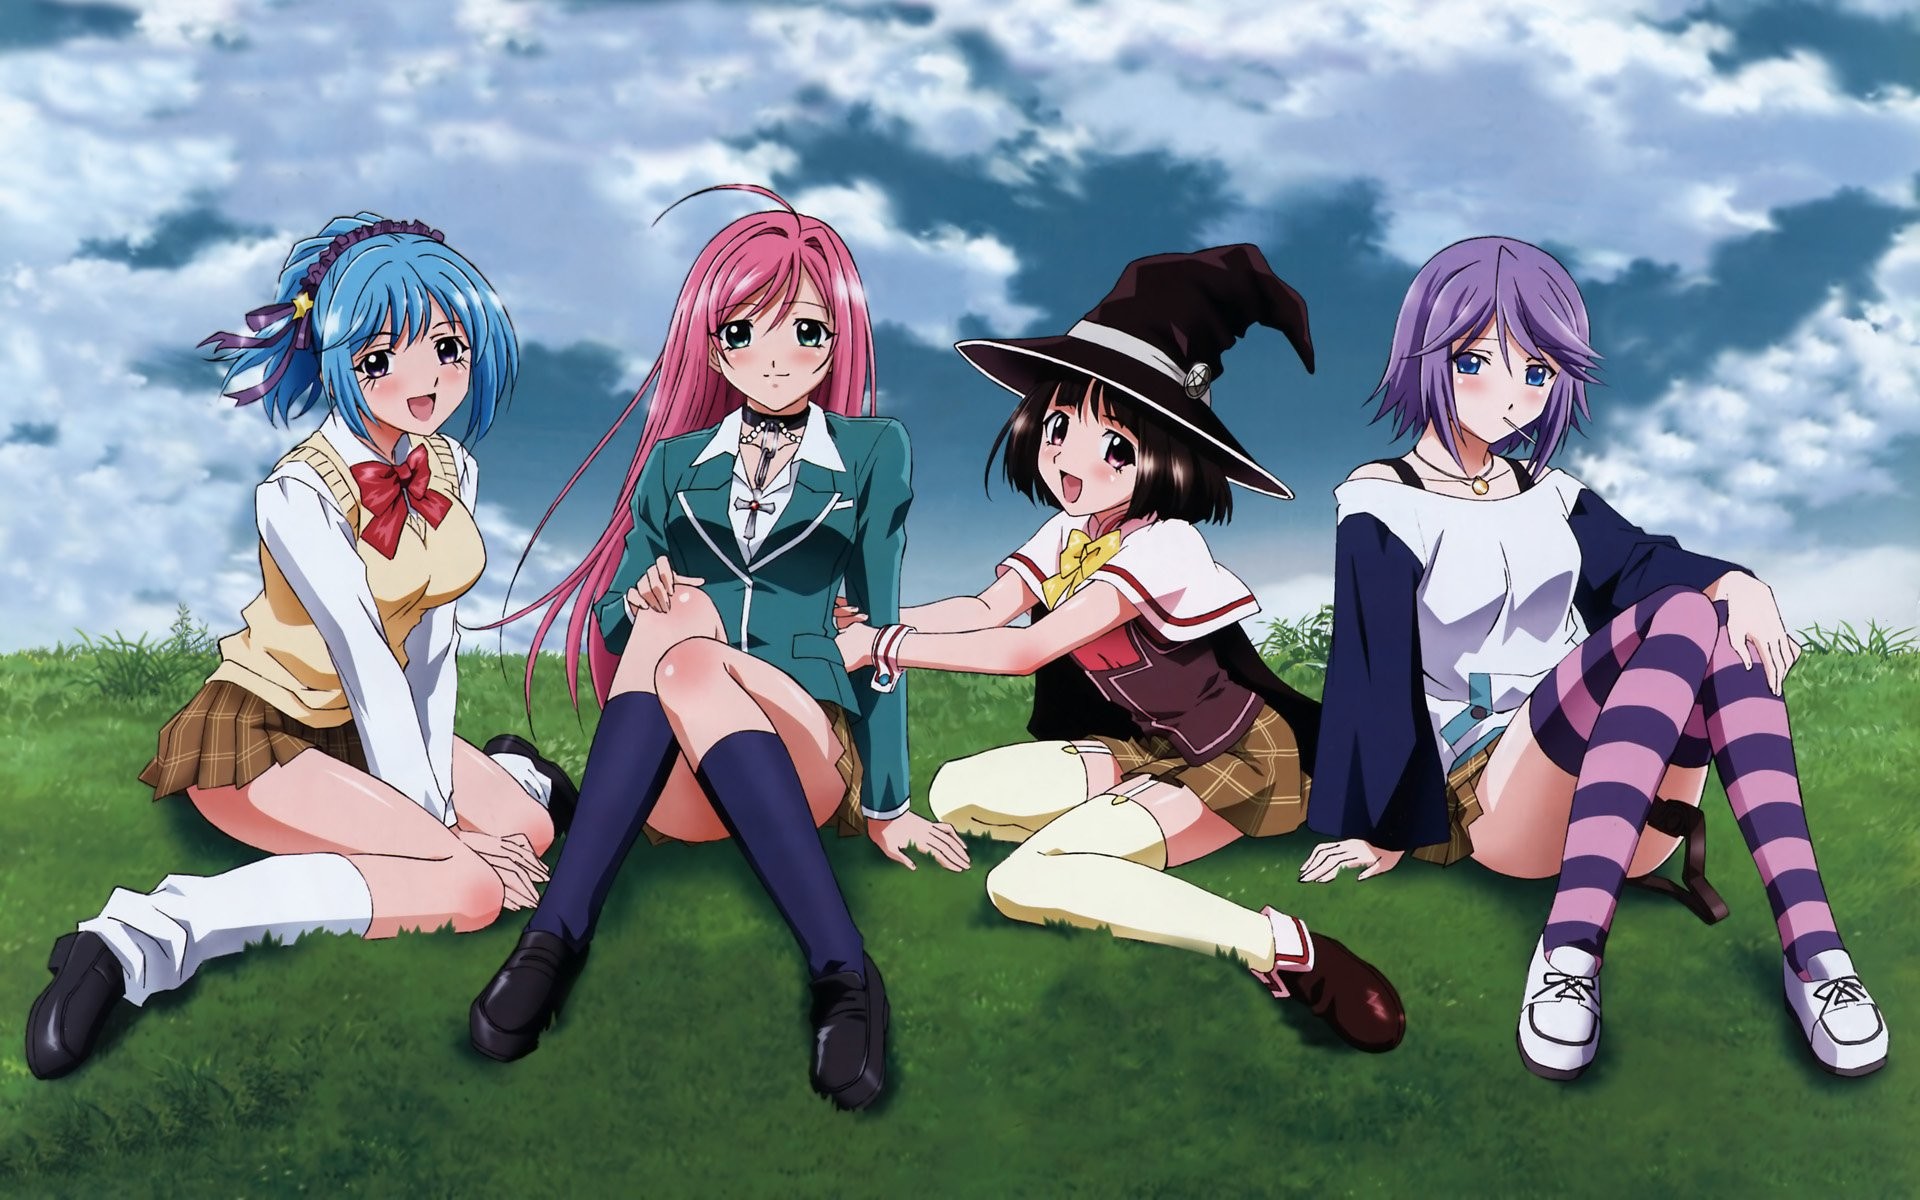 1920x1200 61 Rosario + Vampire HD Wallpapers | Backgrounds - Wallpaper Abyss